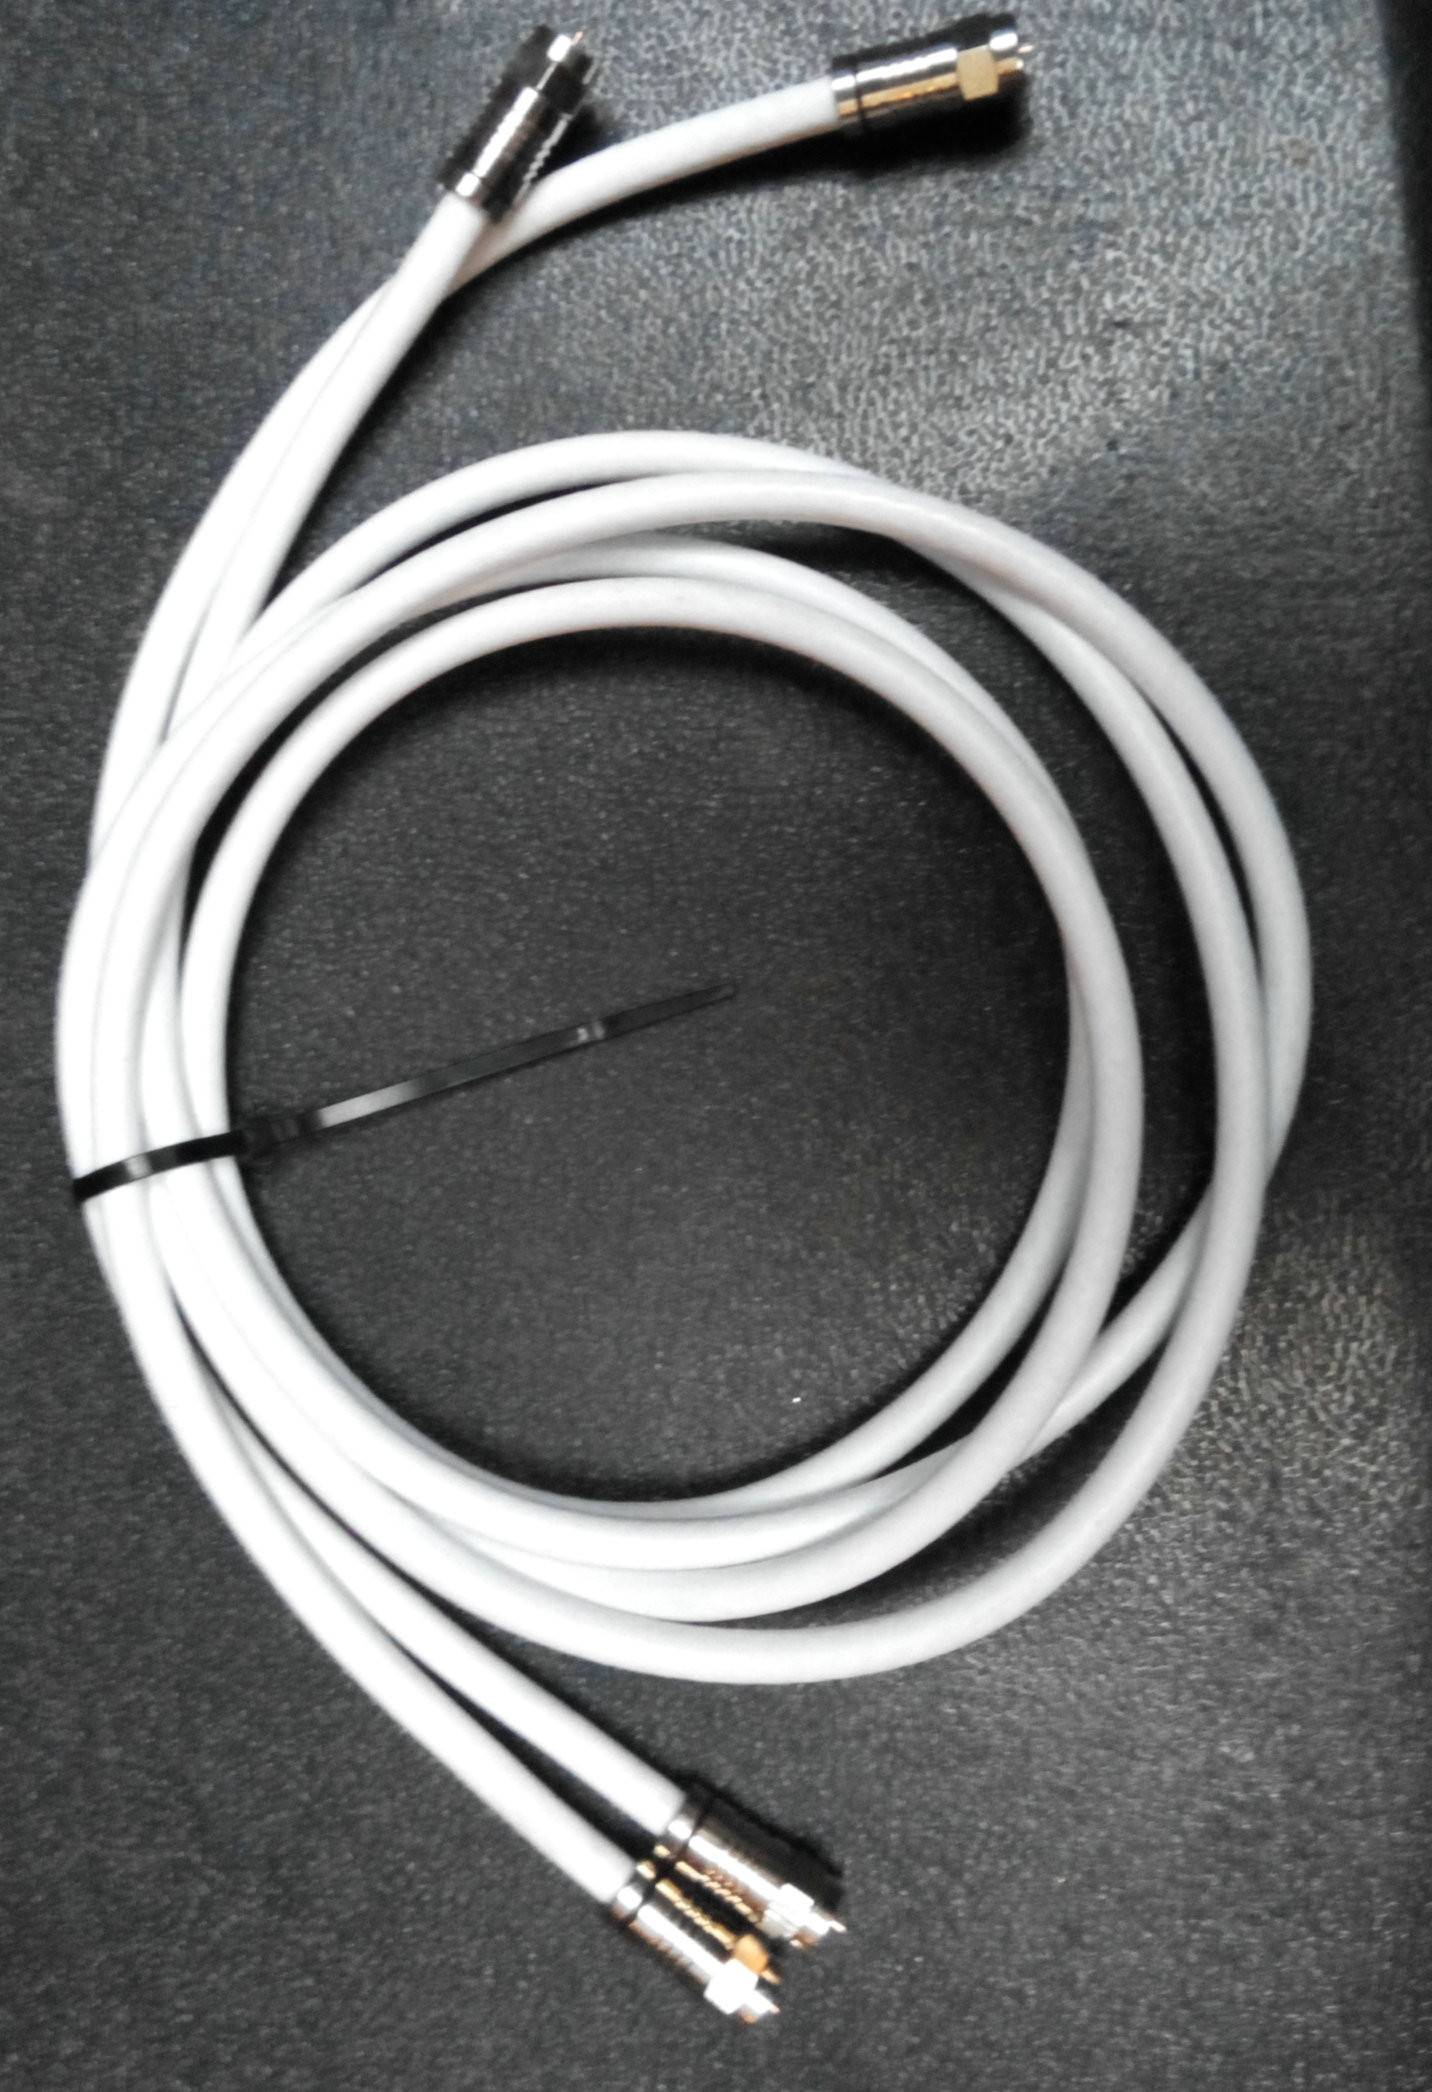  Flooding Compound RG6 Coaxial Cable Indoor PVC Jacket F Connector ROSH Compliant Manufactures